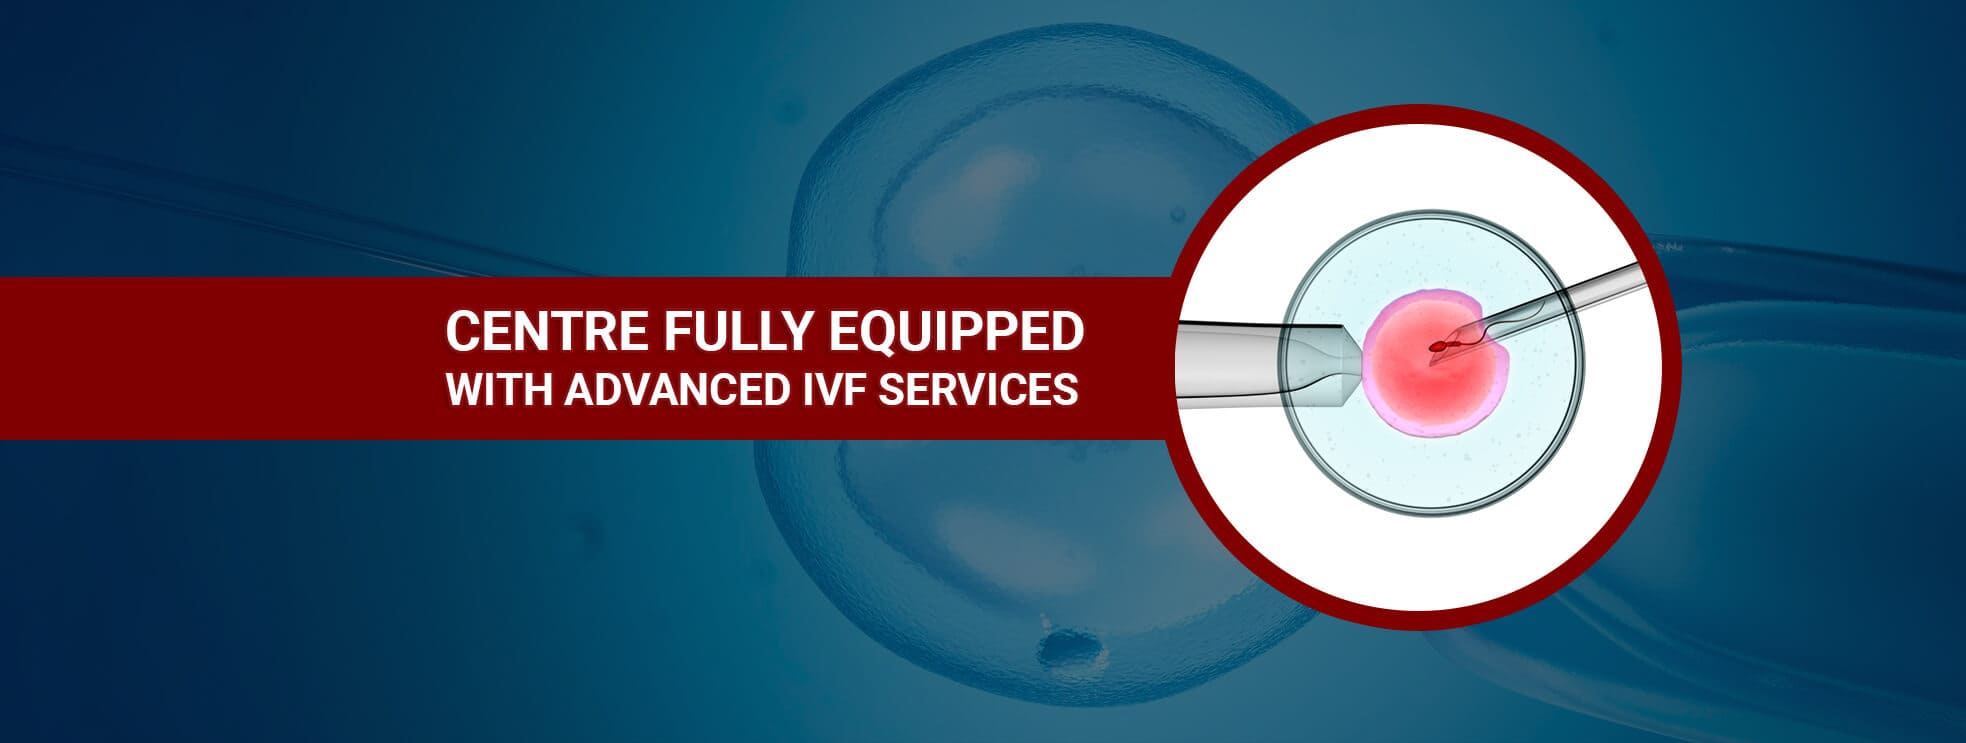 IVF Center fully equipped with highly sophisticated operation theatre for fertility enhancement services